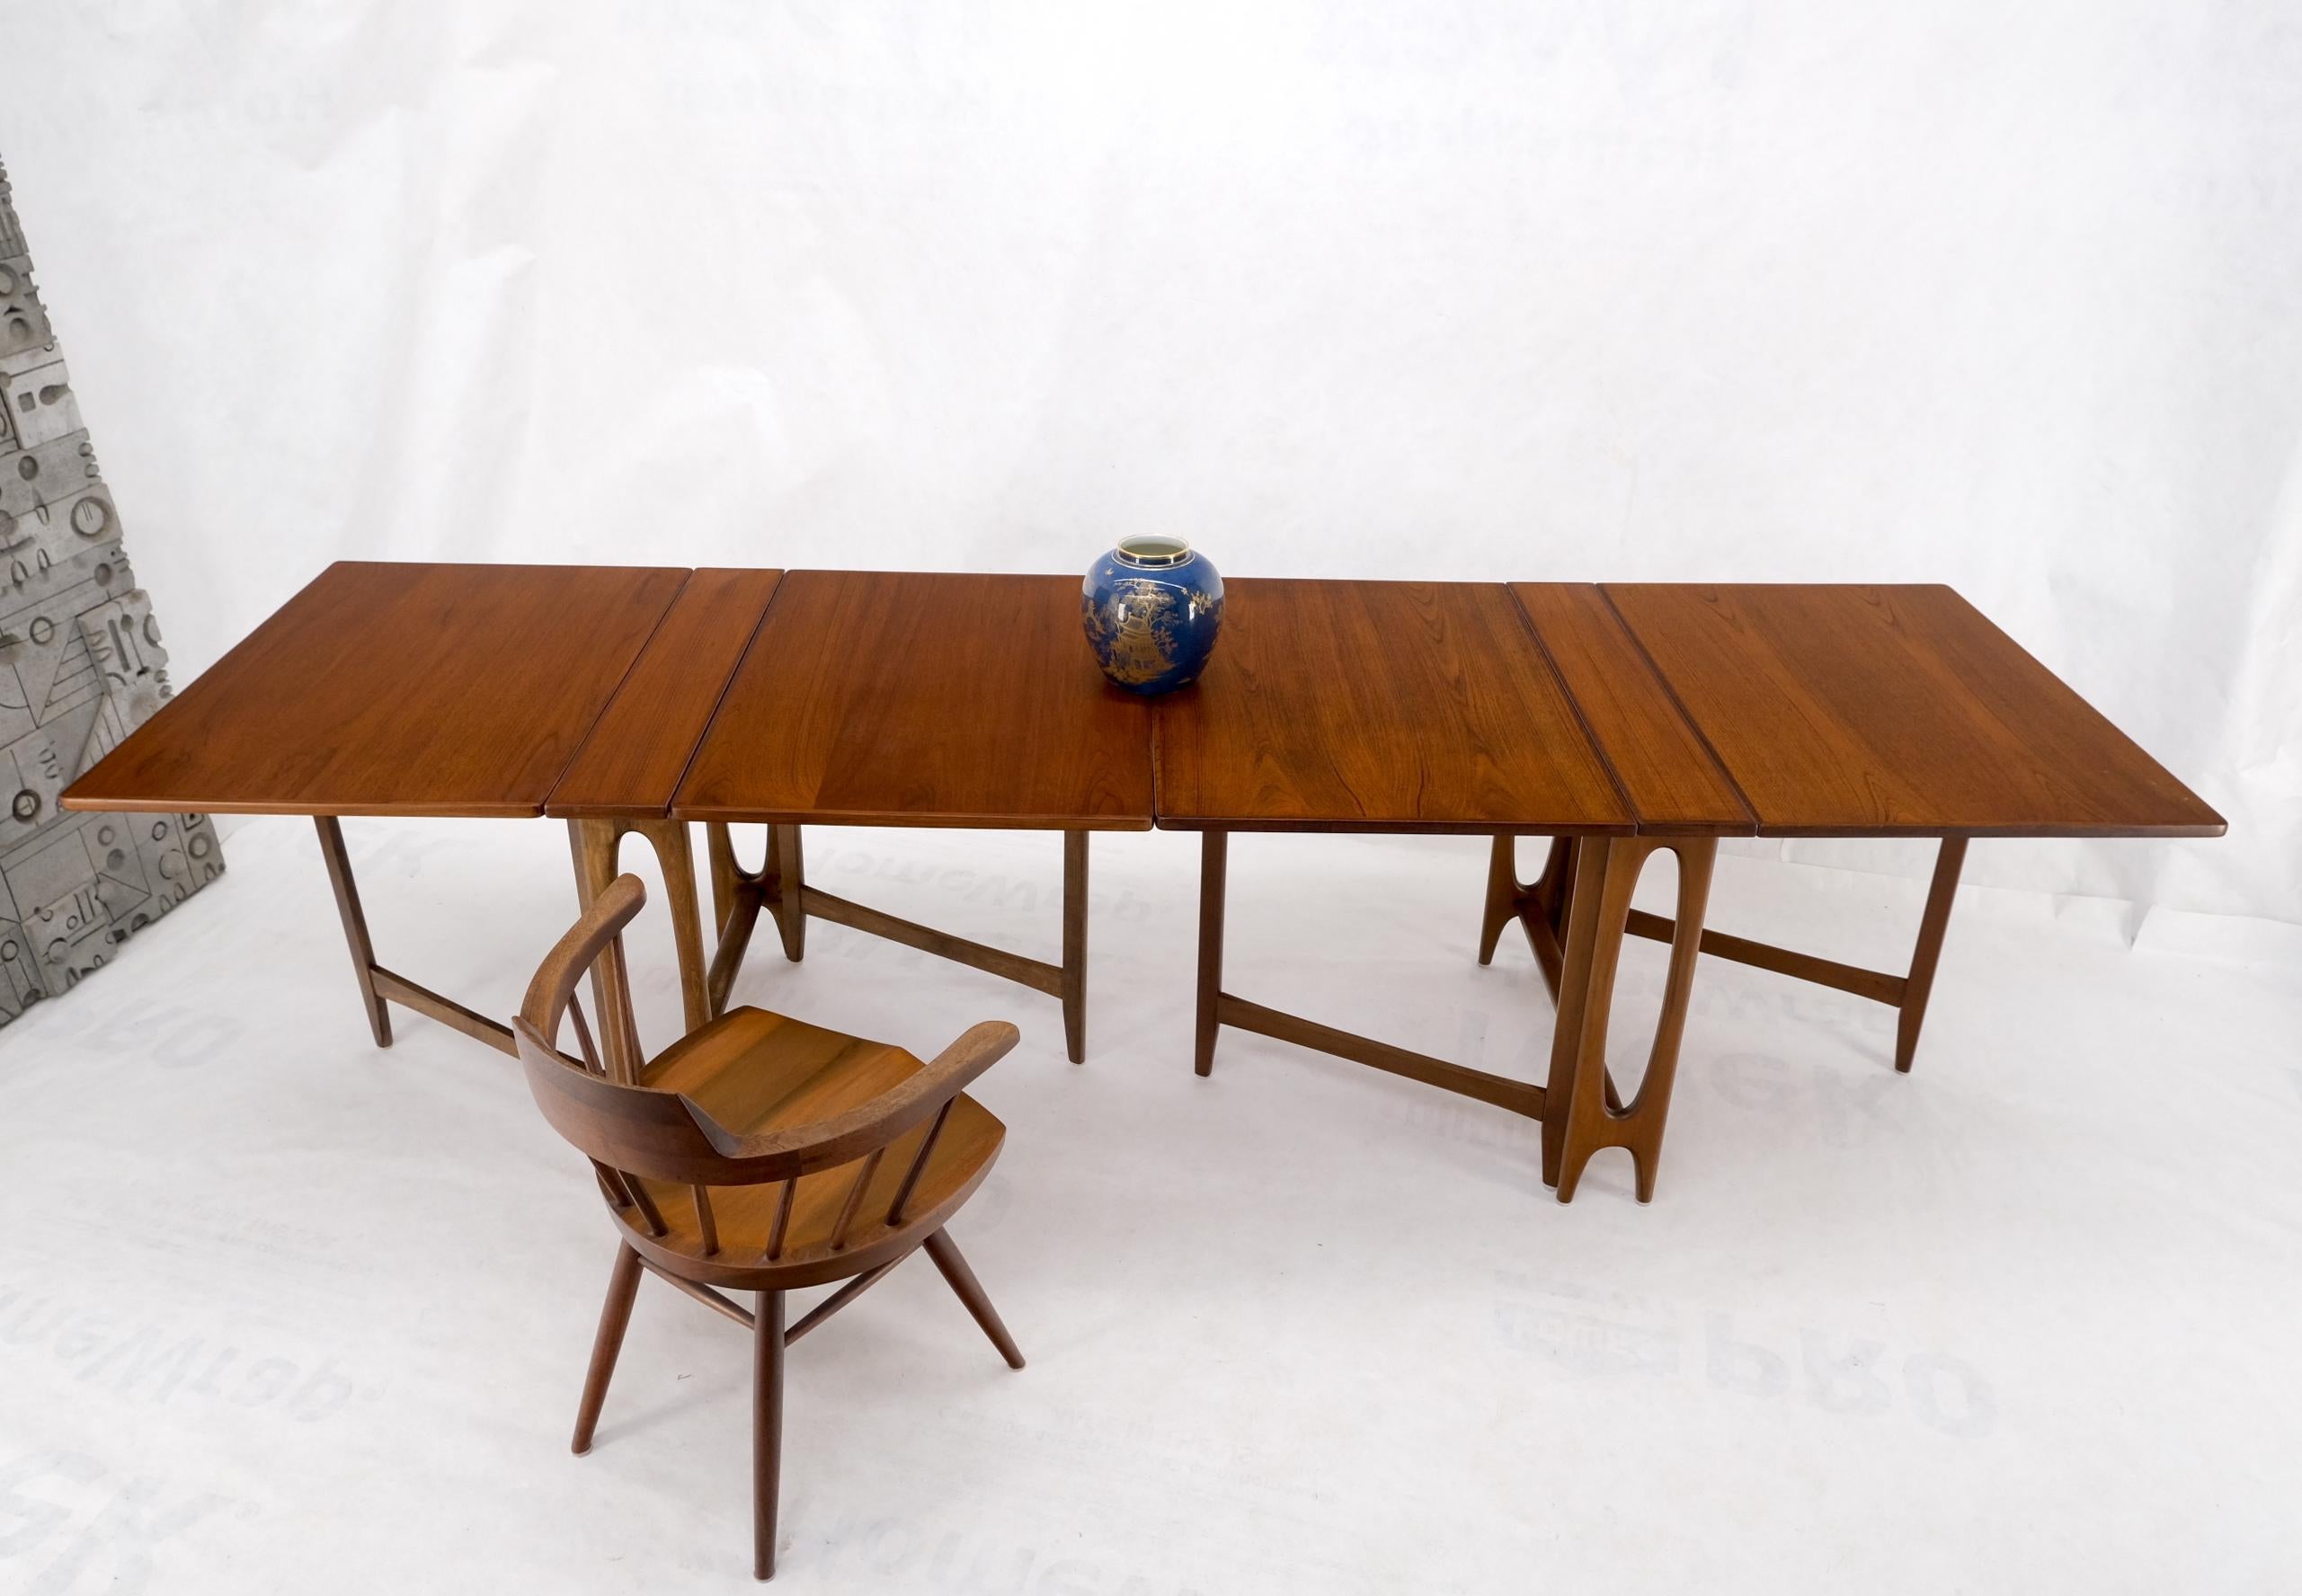 Teak Danish Mid-Century Modern Banquet Dining Gate Leg Maria Table 2pcs MINT! In Excellent Condition For Sale In Rockaway, NJ